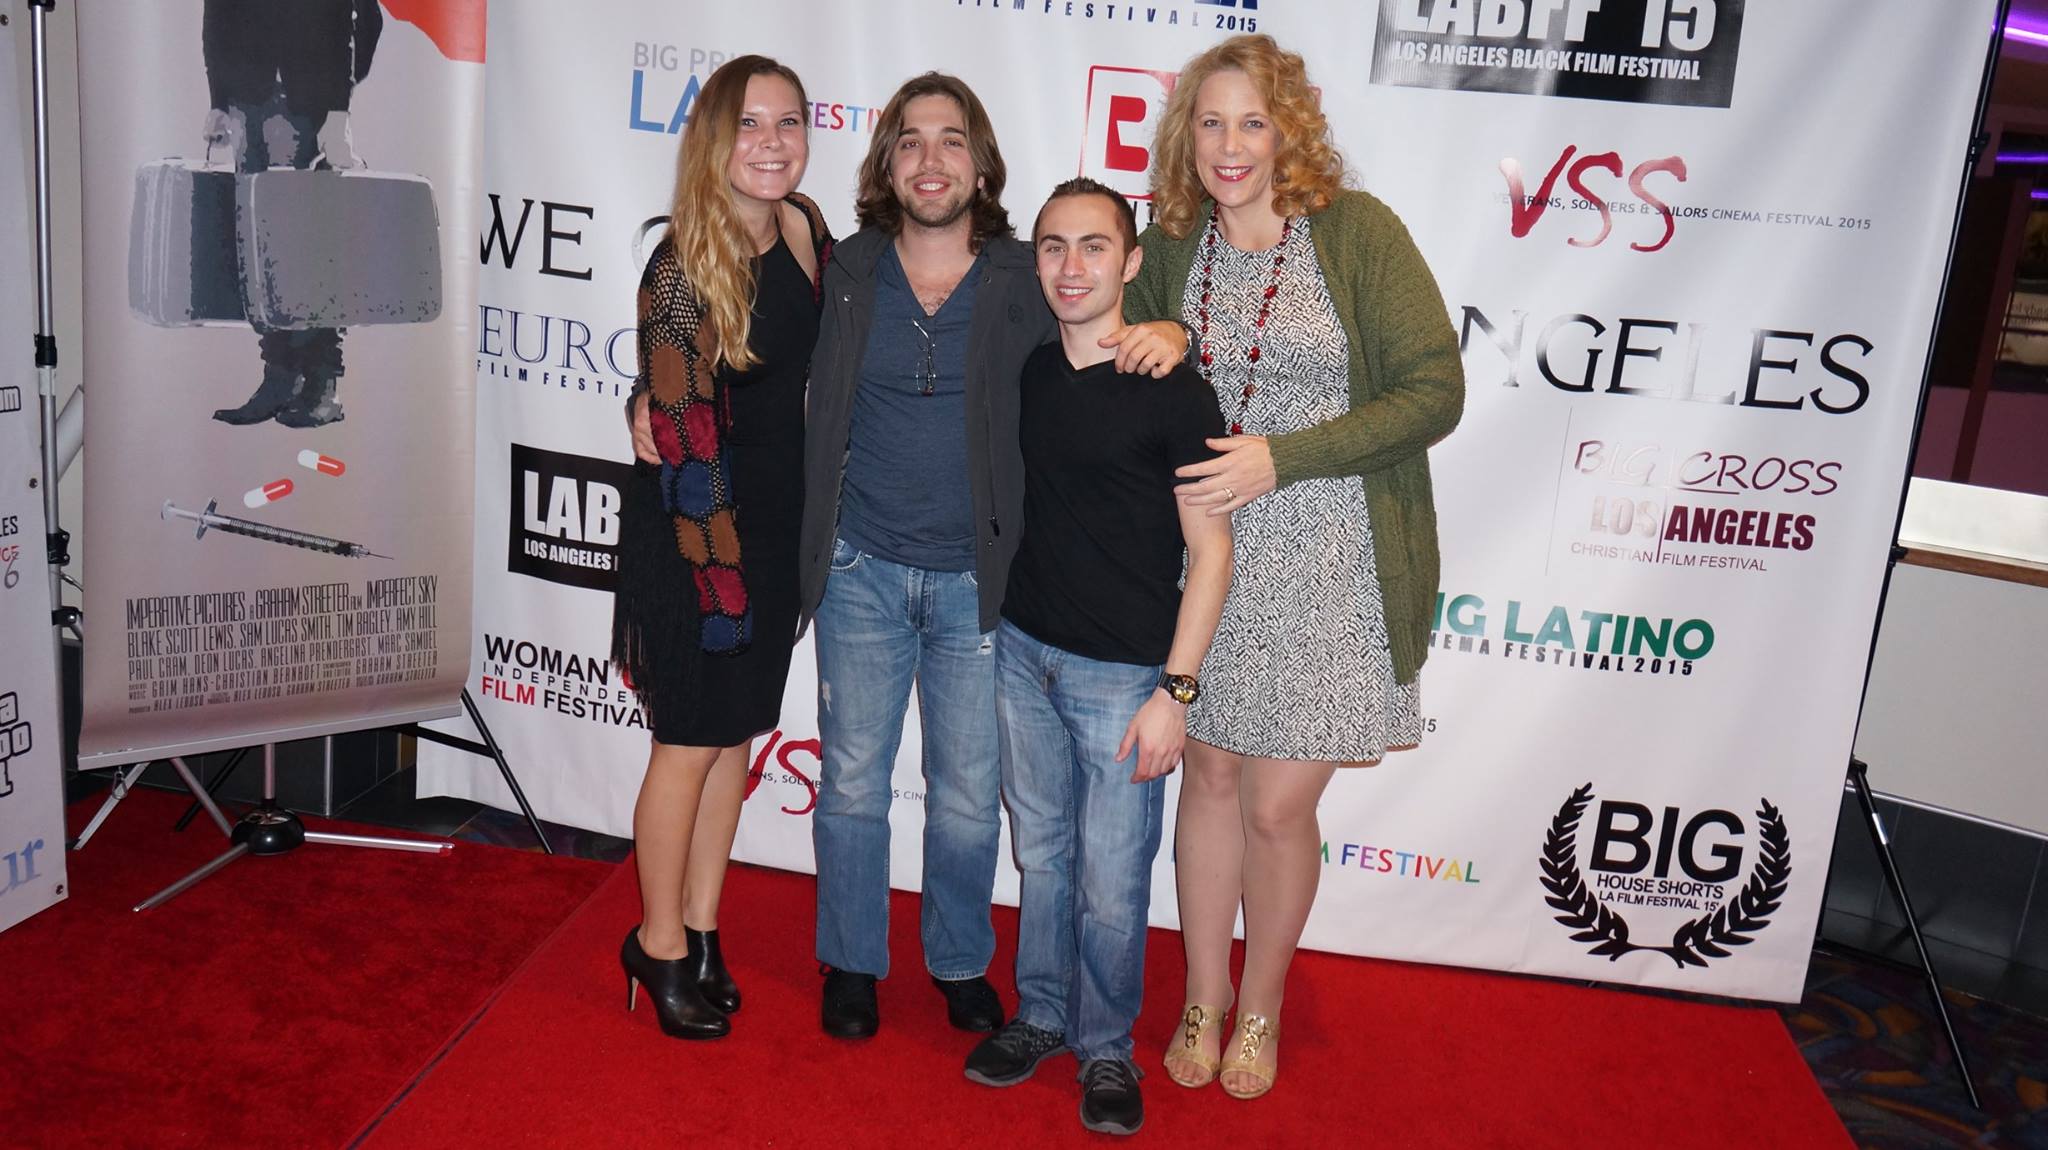 Left to Right: Kelsey Potkay, Joseph Scarpino, Nick Marchese, and Stacey Schnepp-Stoops at The Big House Film Festival in Los Angeles, CA